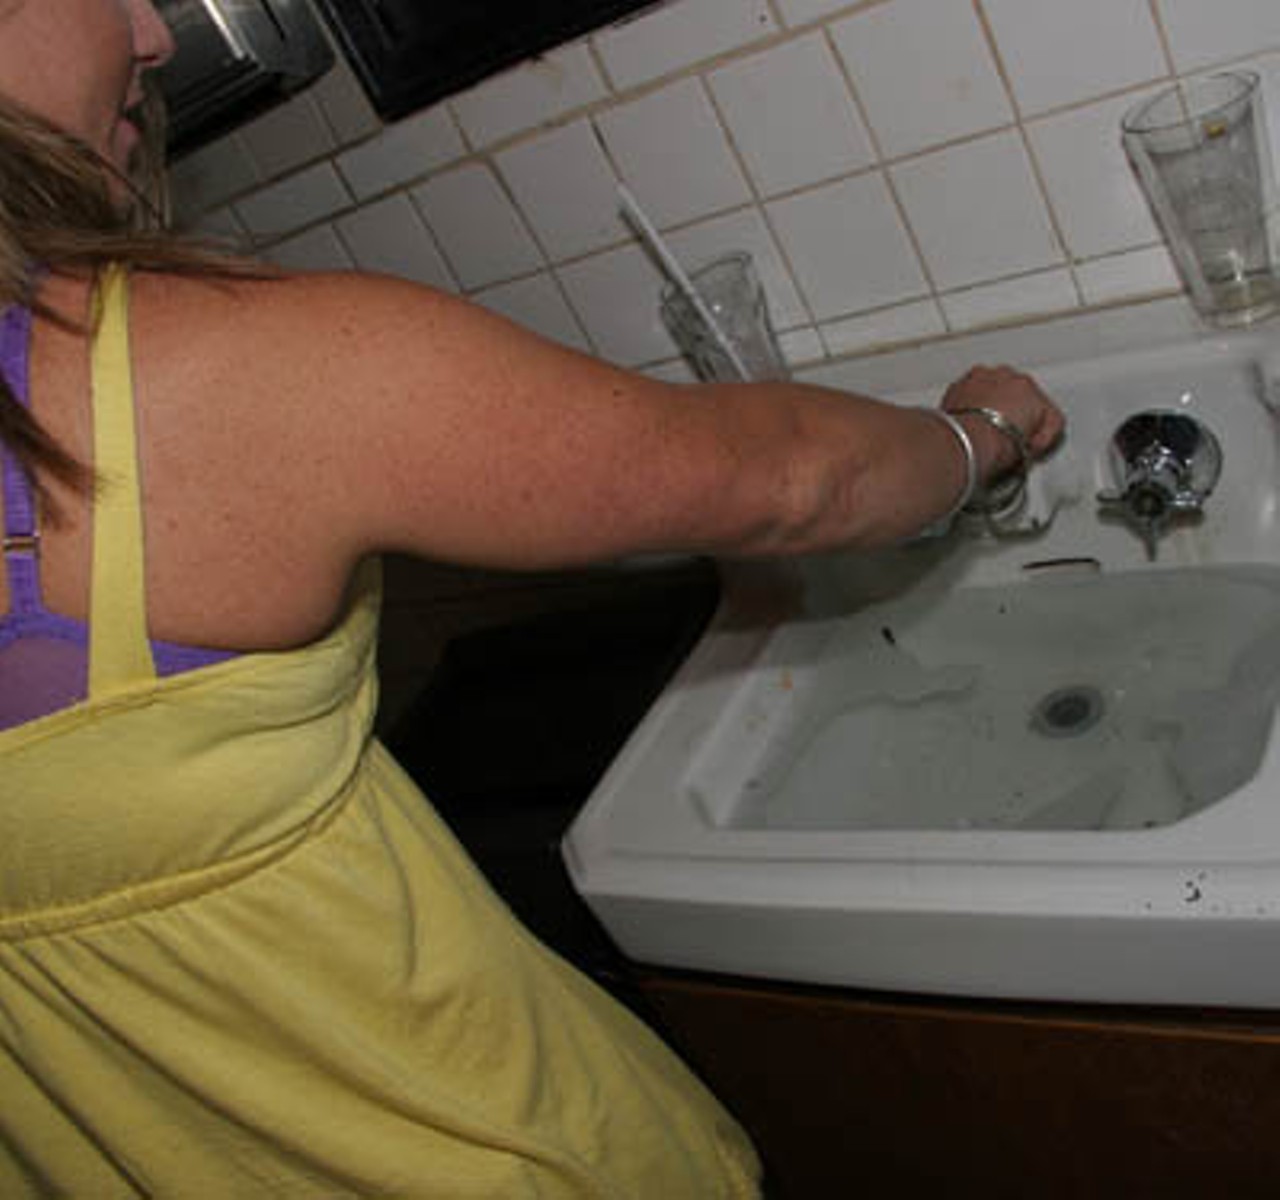 The sink at the Upstairs Lounge left much to be desired. Friday night, August 22.